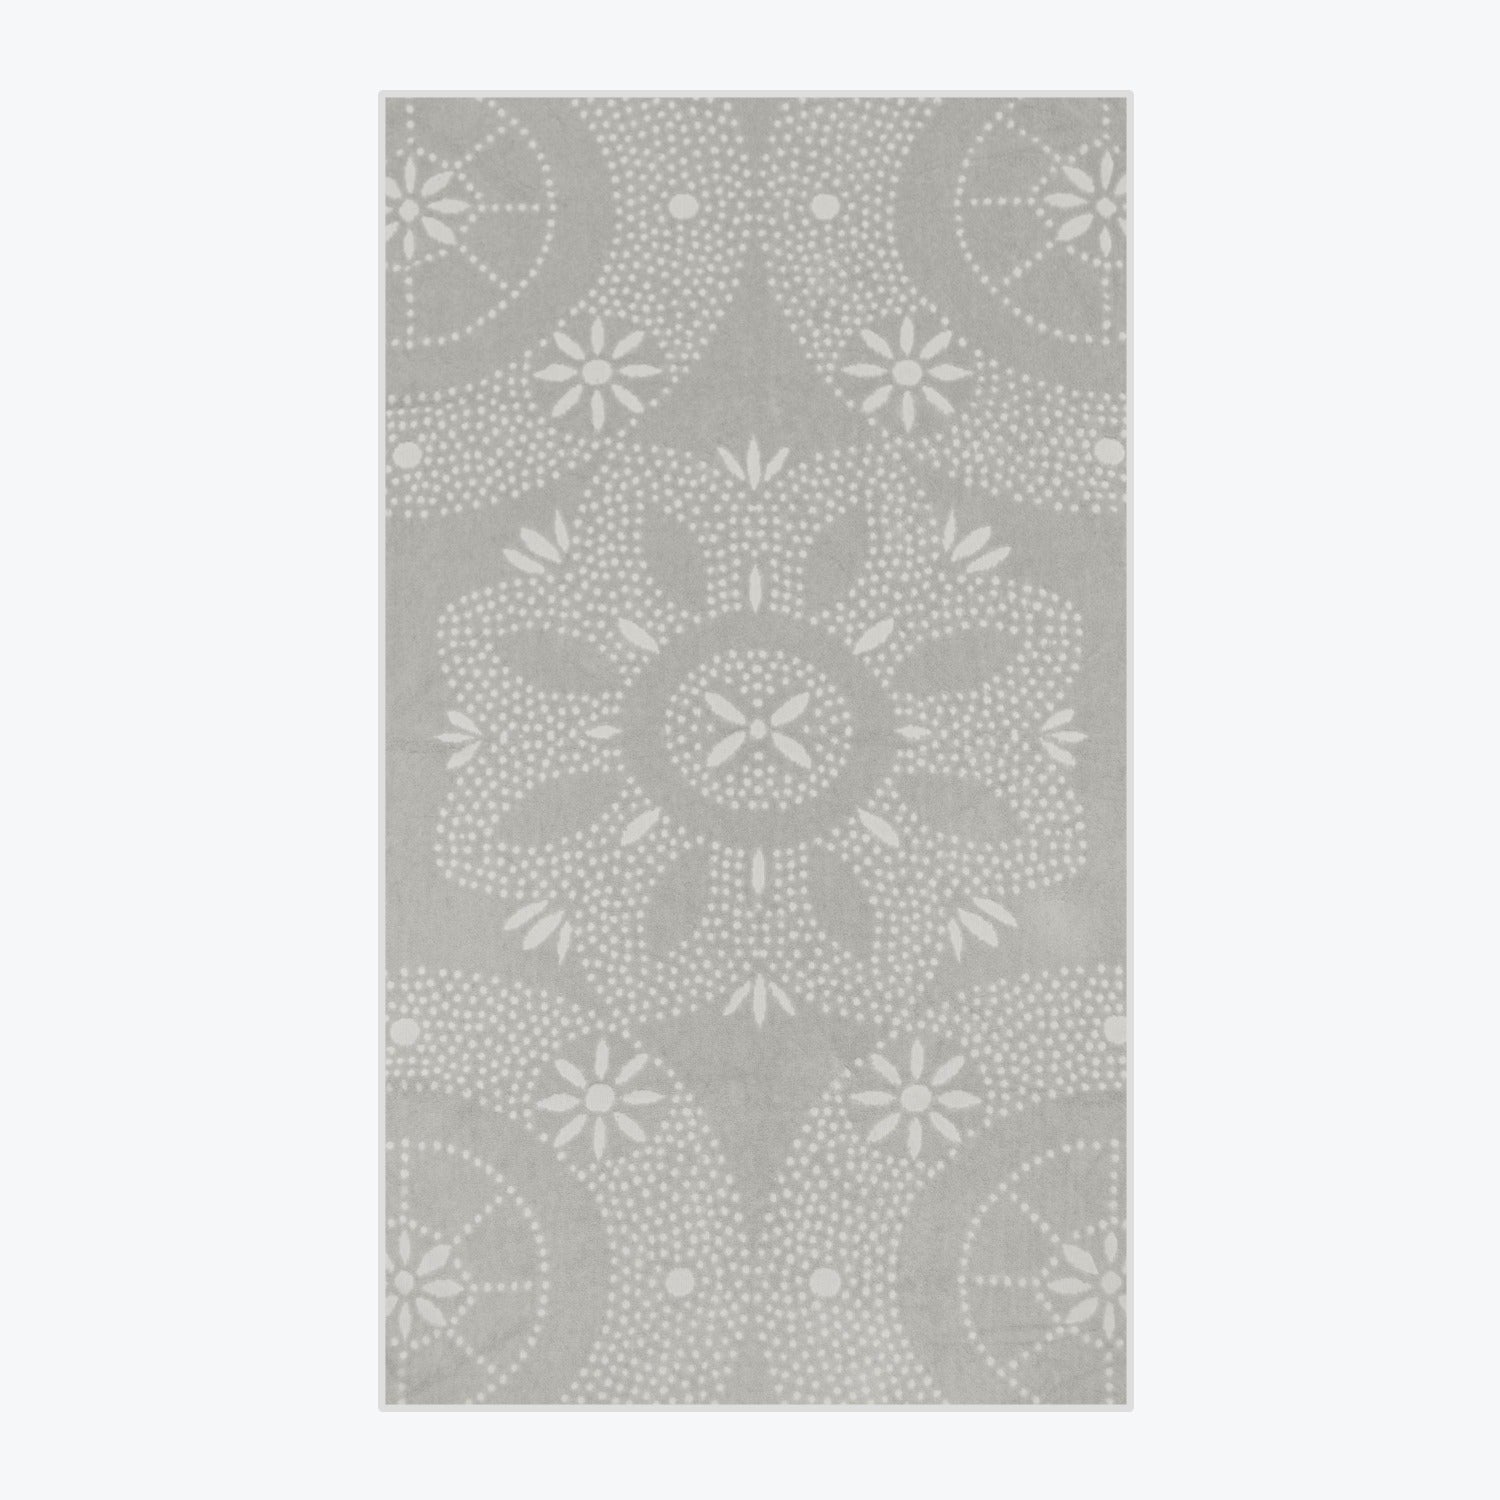 Marrakesh Patterned Floral Towel in Dove Grey